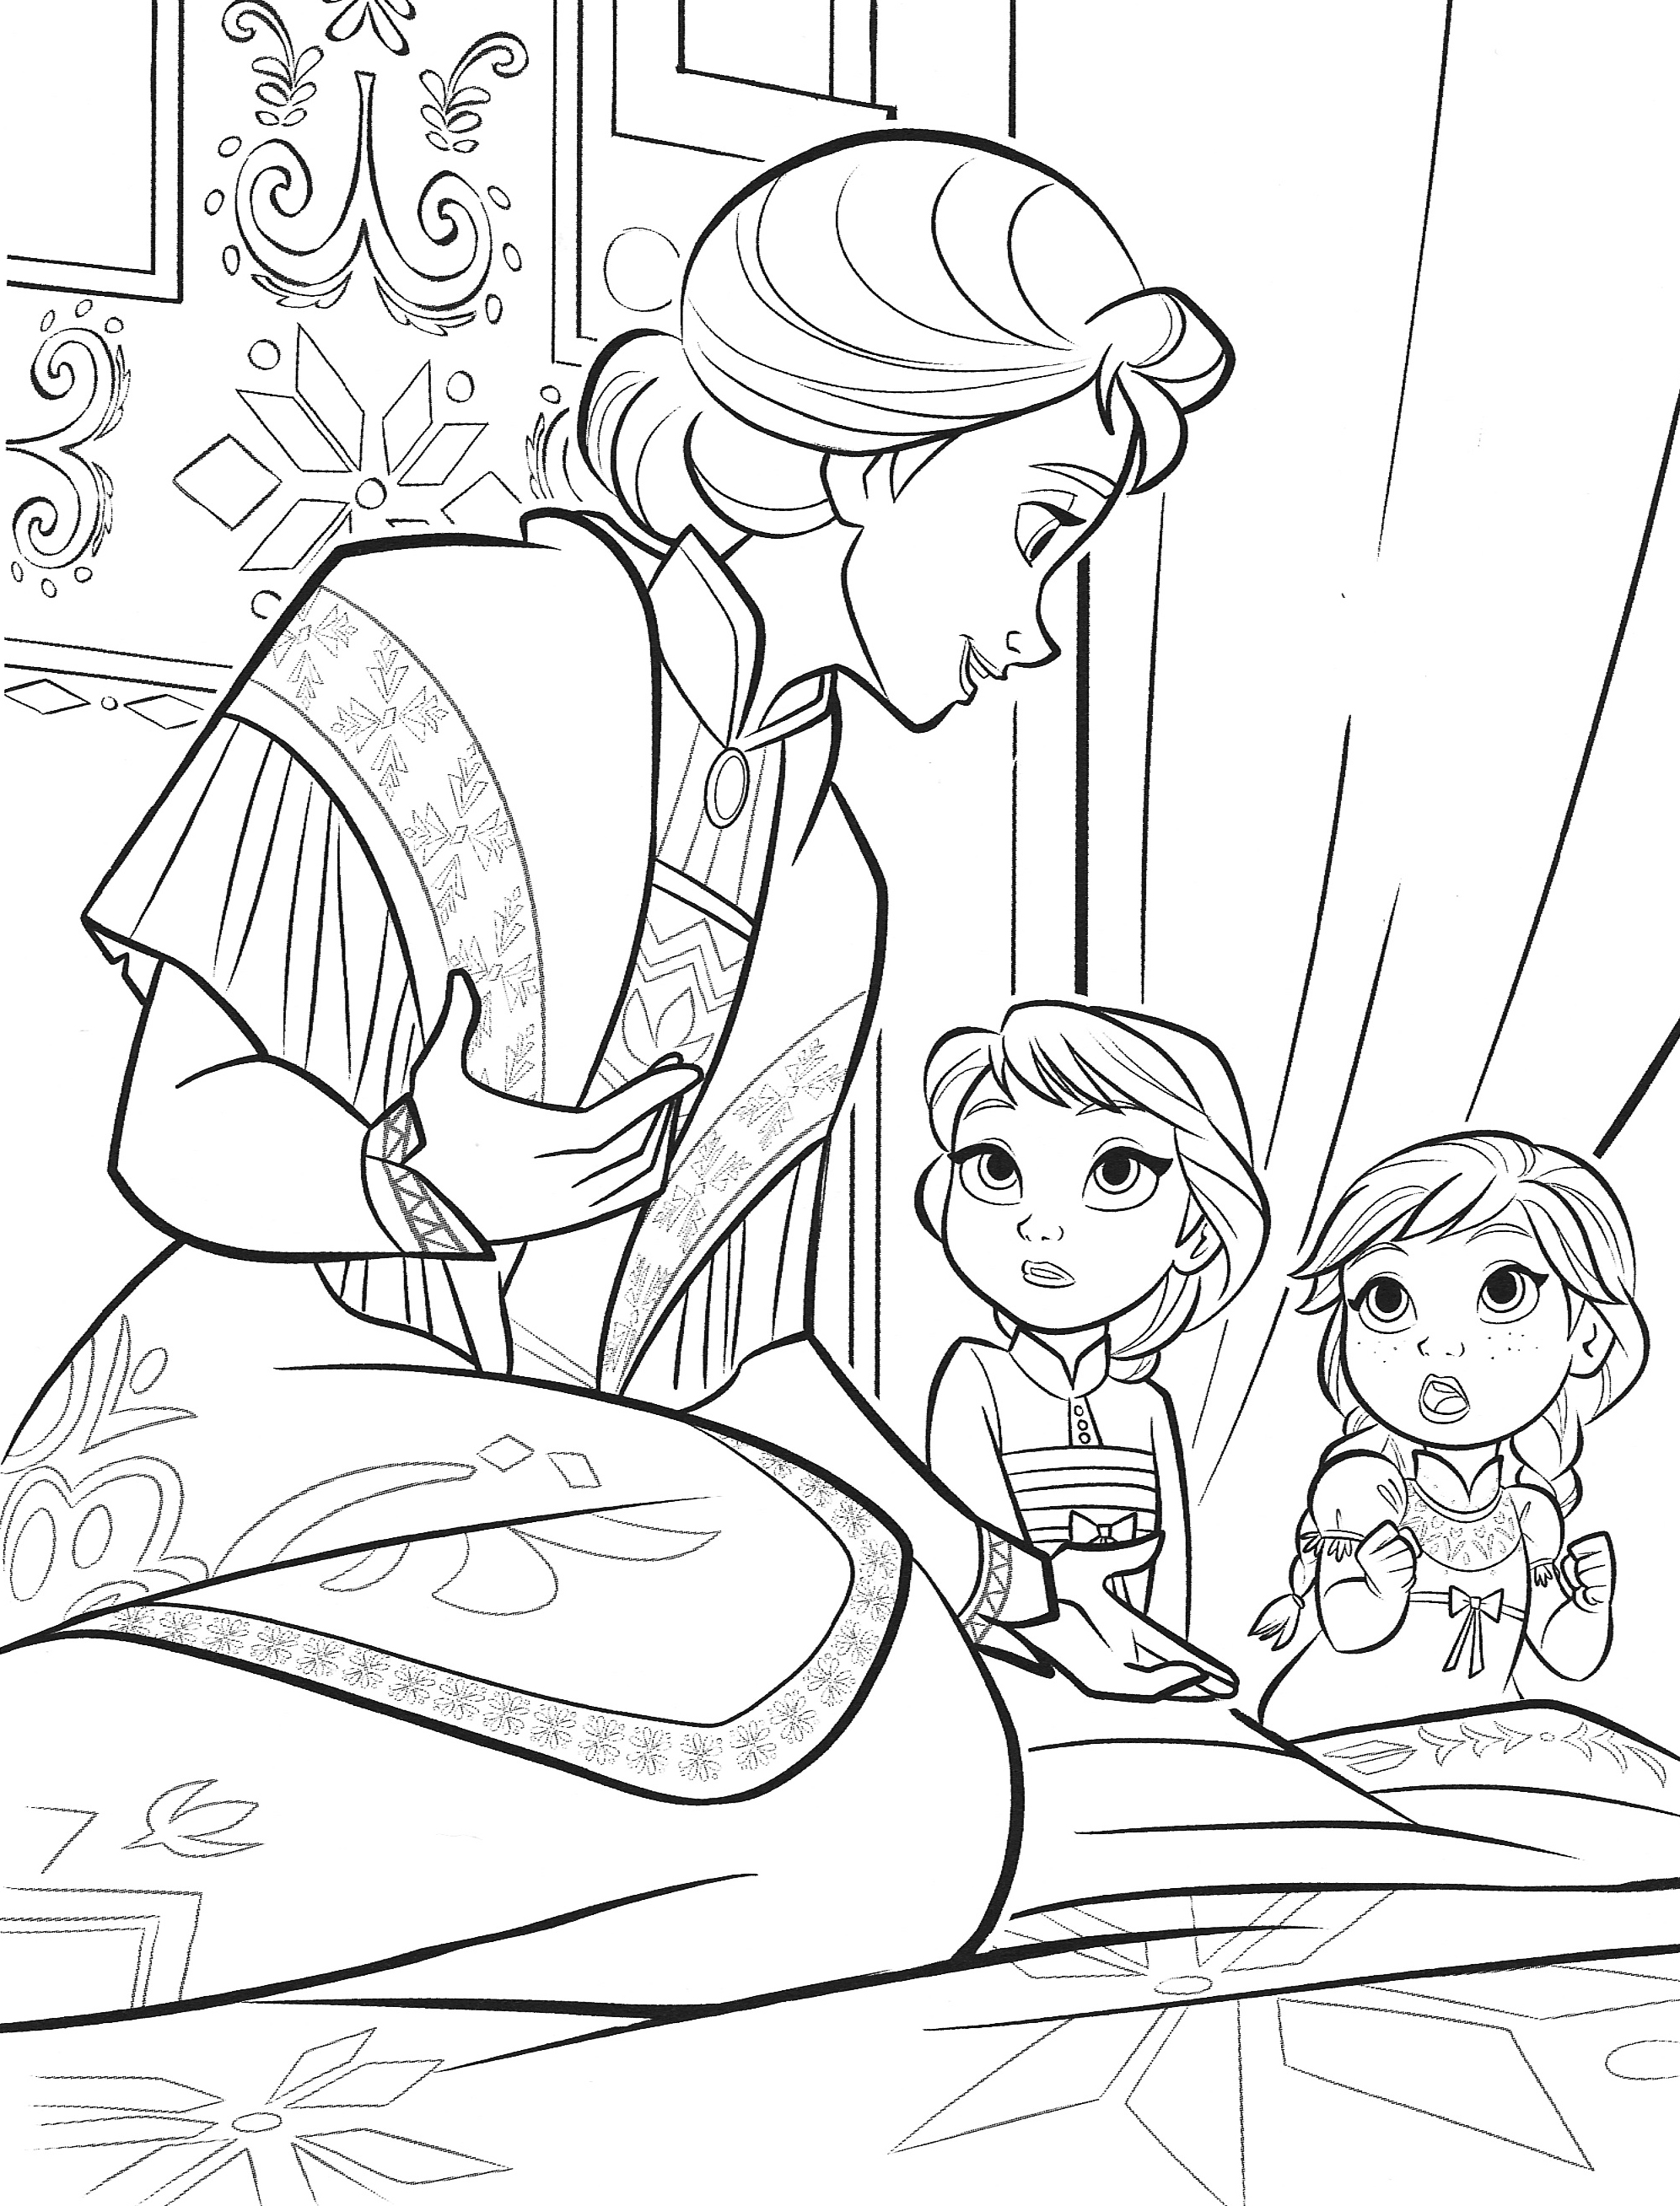 Download Anna Frozen Coloring Pages - Coloring Home